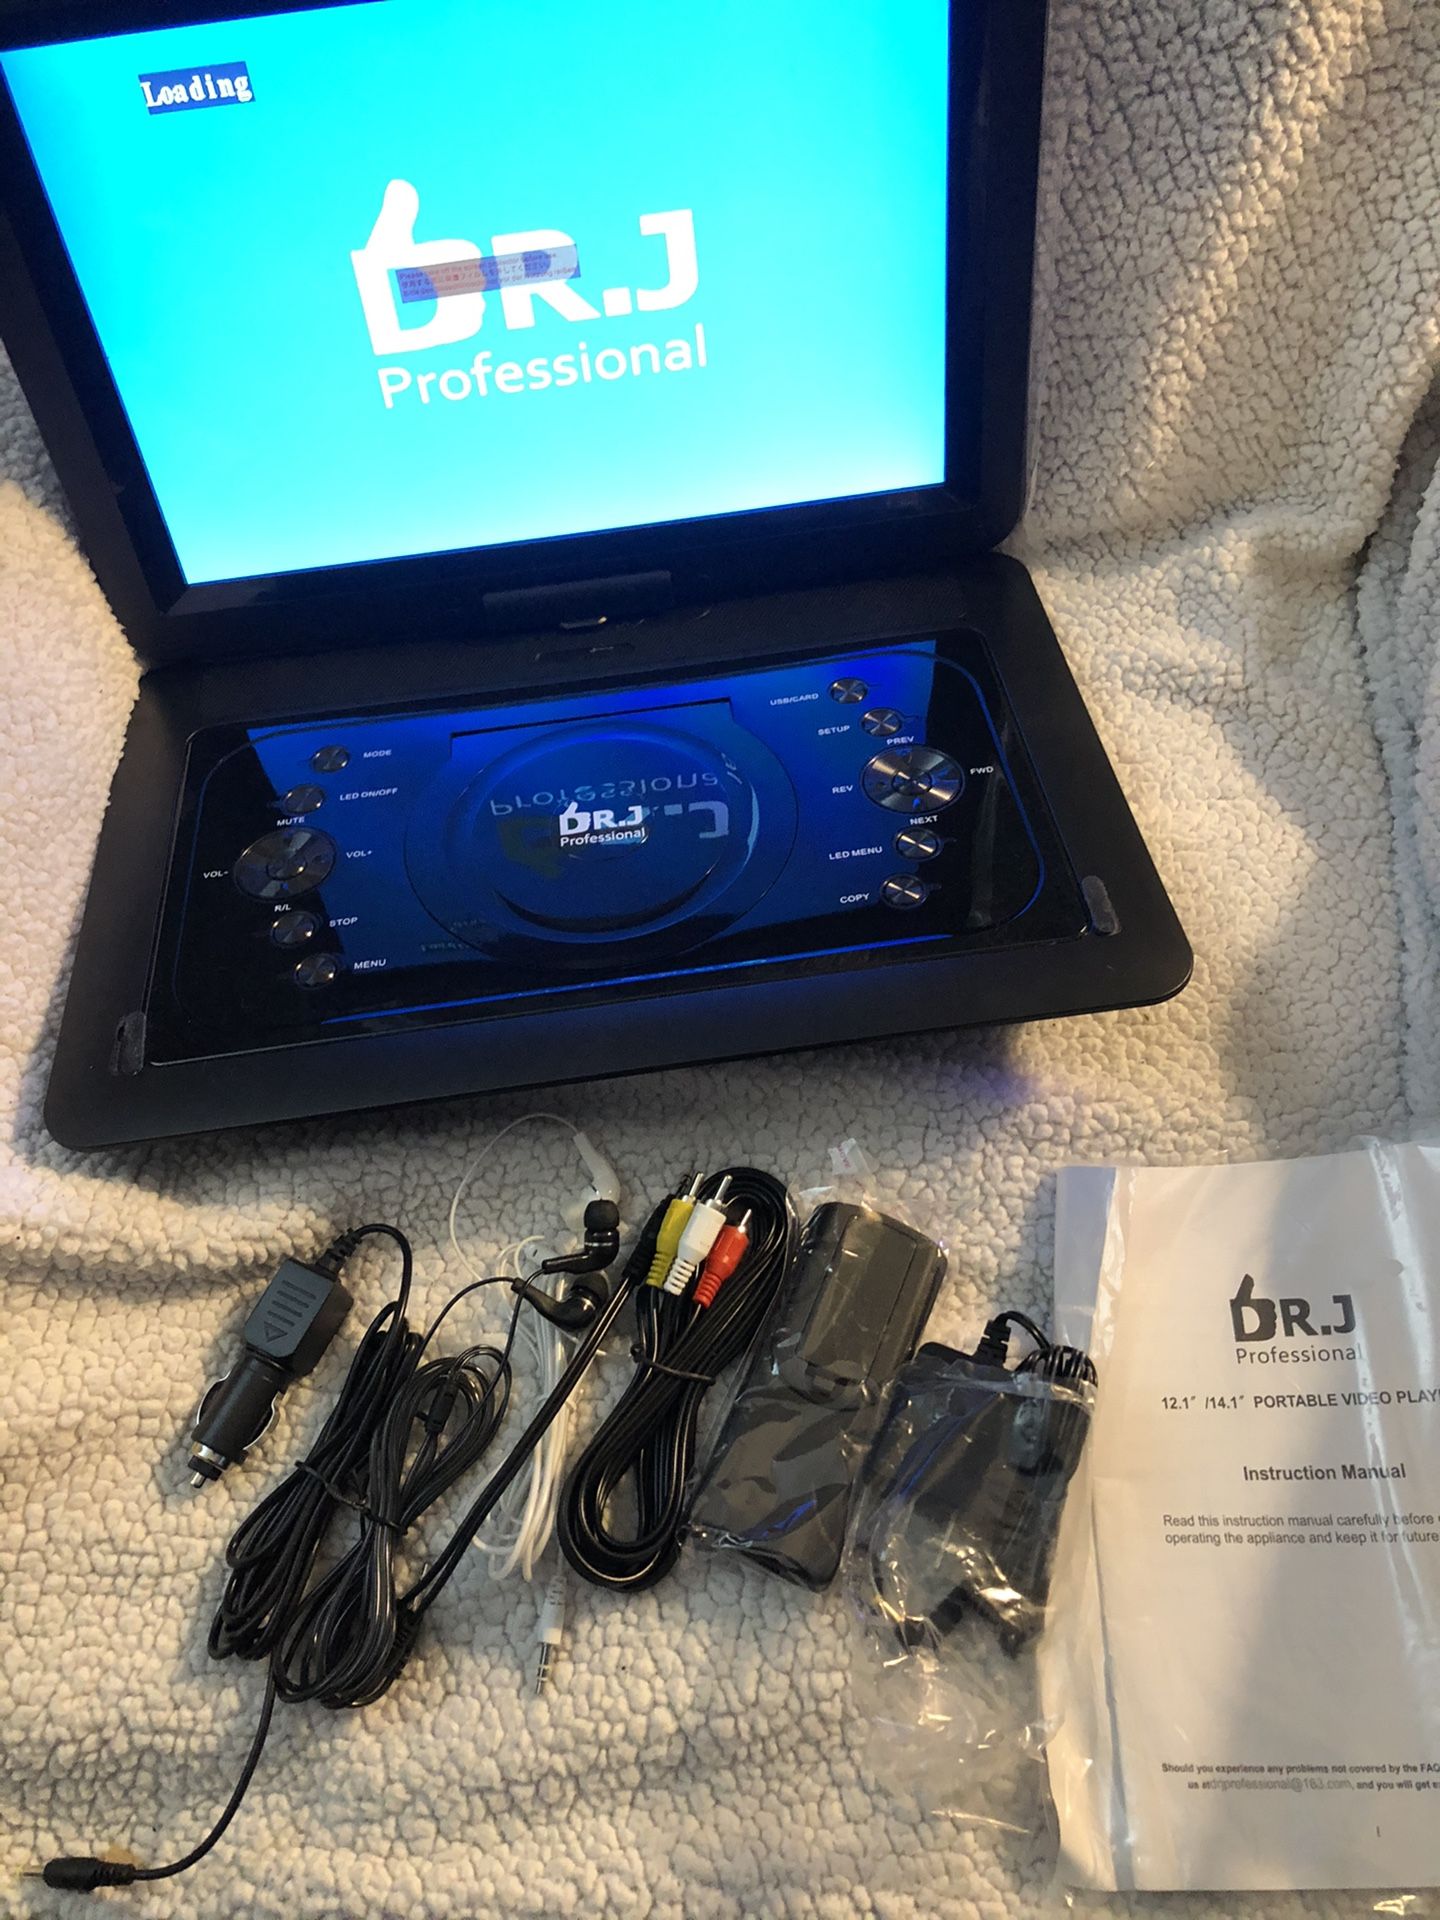 DR. J Professional 14.1 inch 7 Hours Portable DVD Player